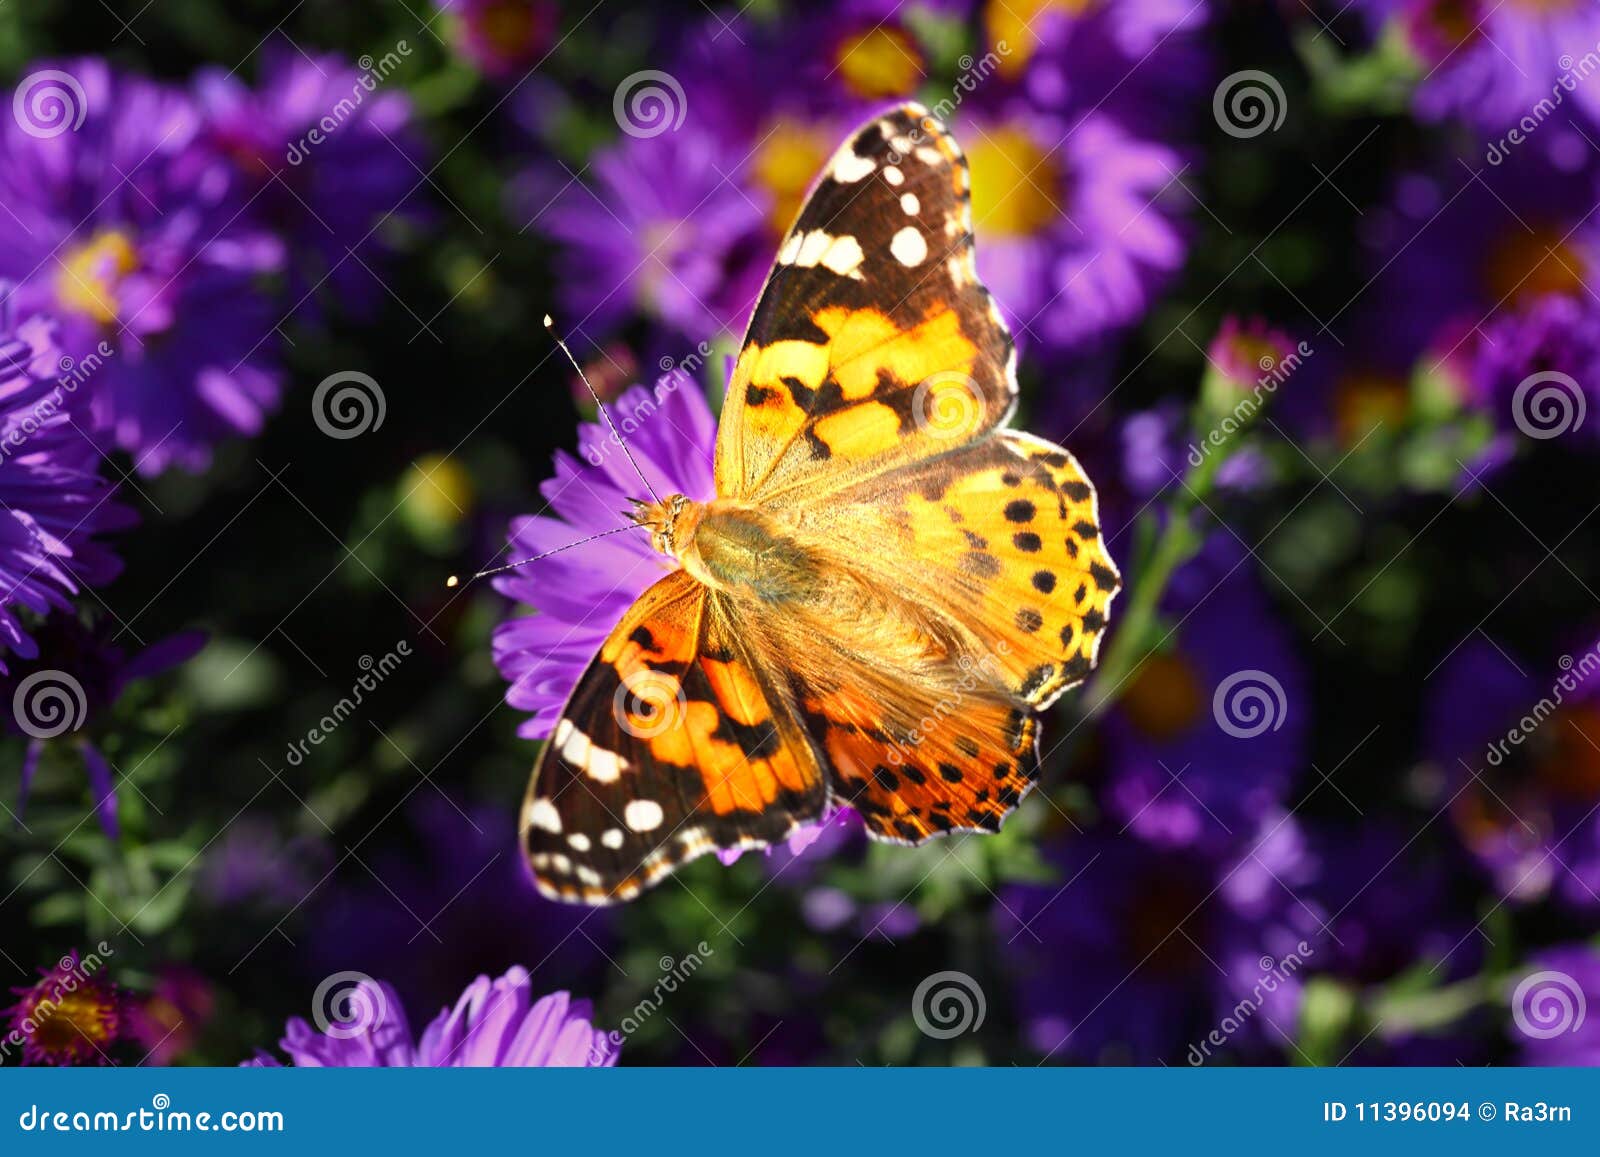 Butterfly on blue flowers stock photo. Image of flora - 11396094